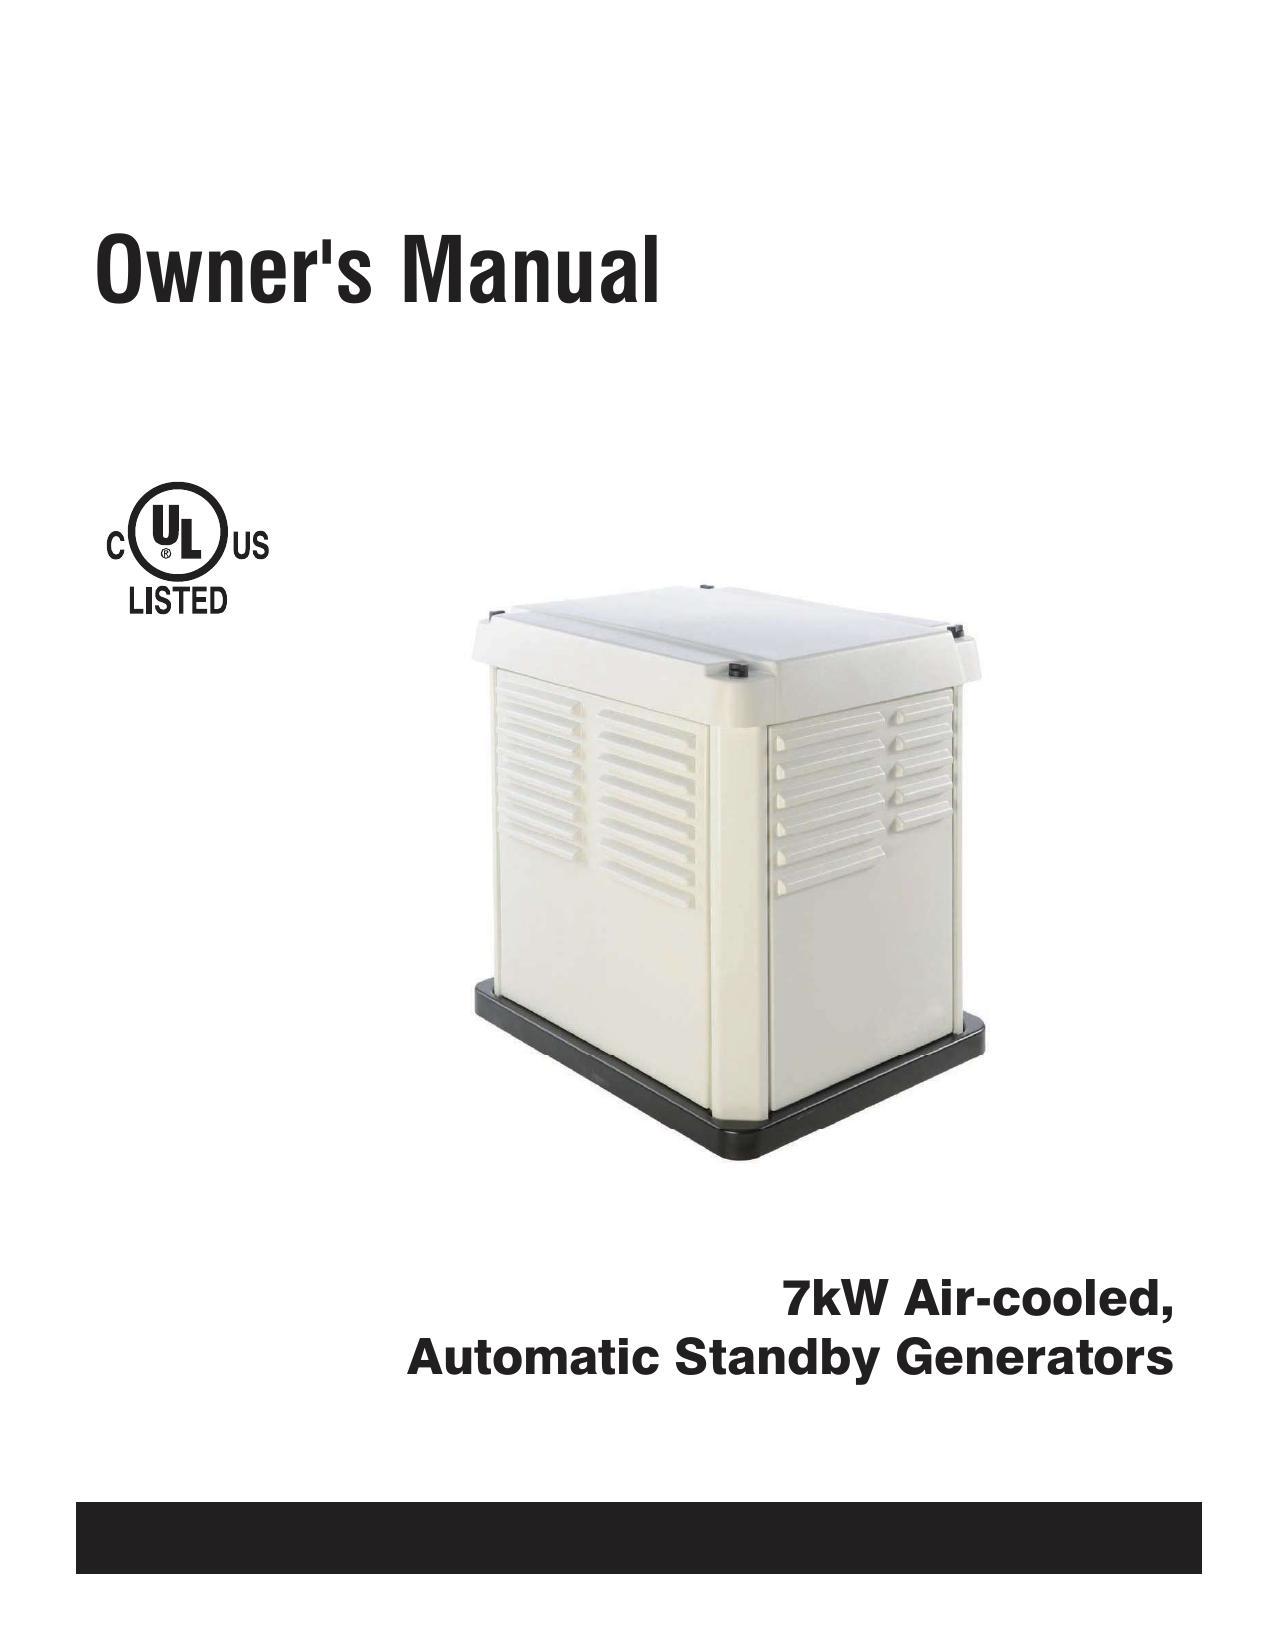 owners-manual-for-7kw-air-cooled-automatic-standby-generators.pdf